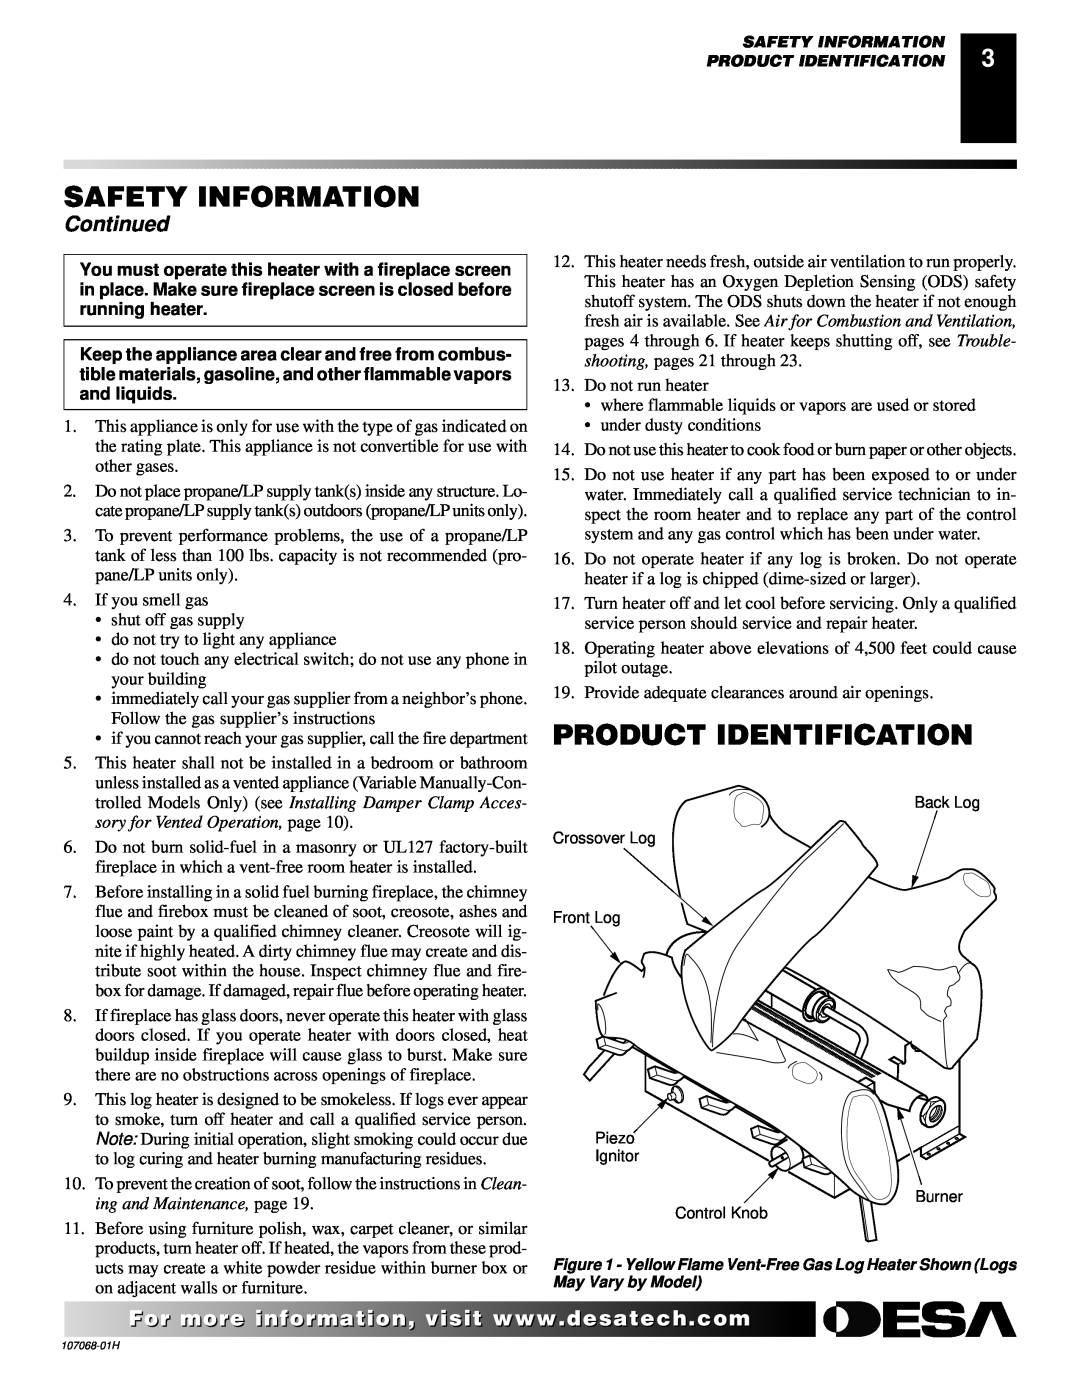 Desa SGS3124P, CLD3018PT, CLD3018NT, SGS3124N installation manual Product Identification, Continued, Safety Information 